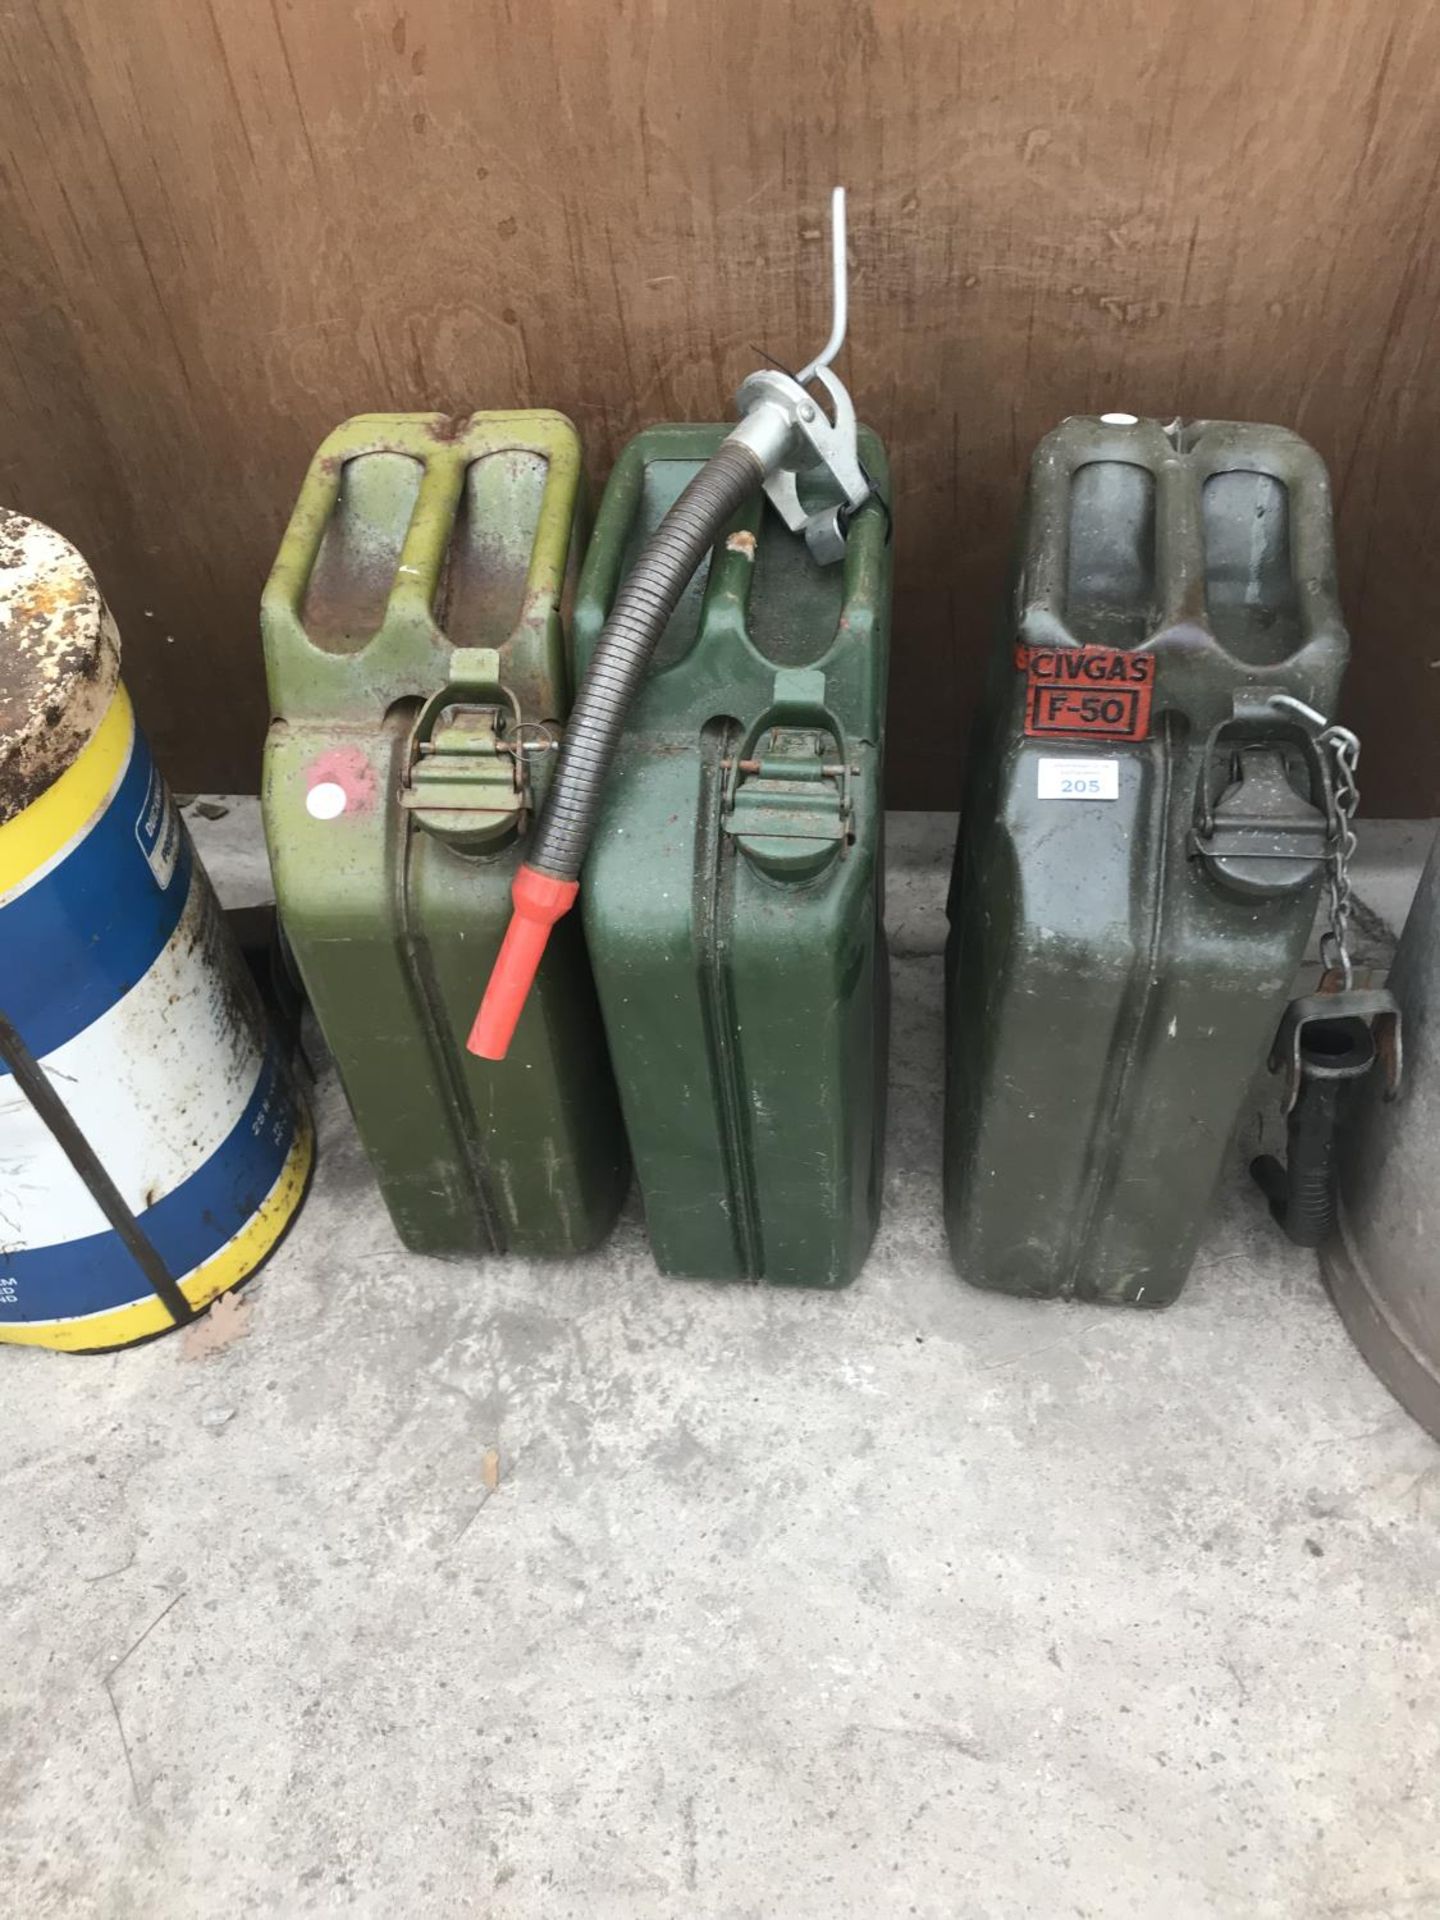 THREE VINTAGE METAL JERRY CANS